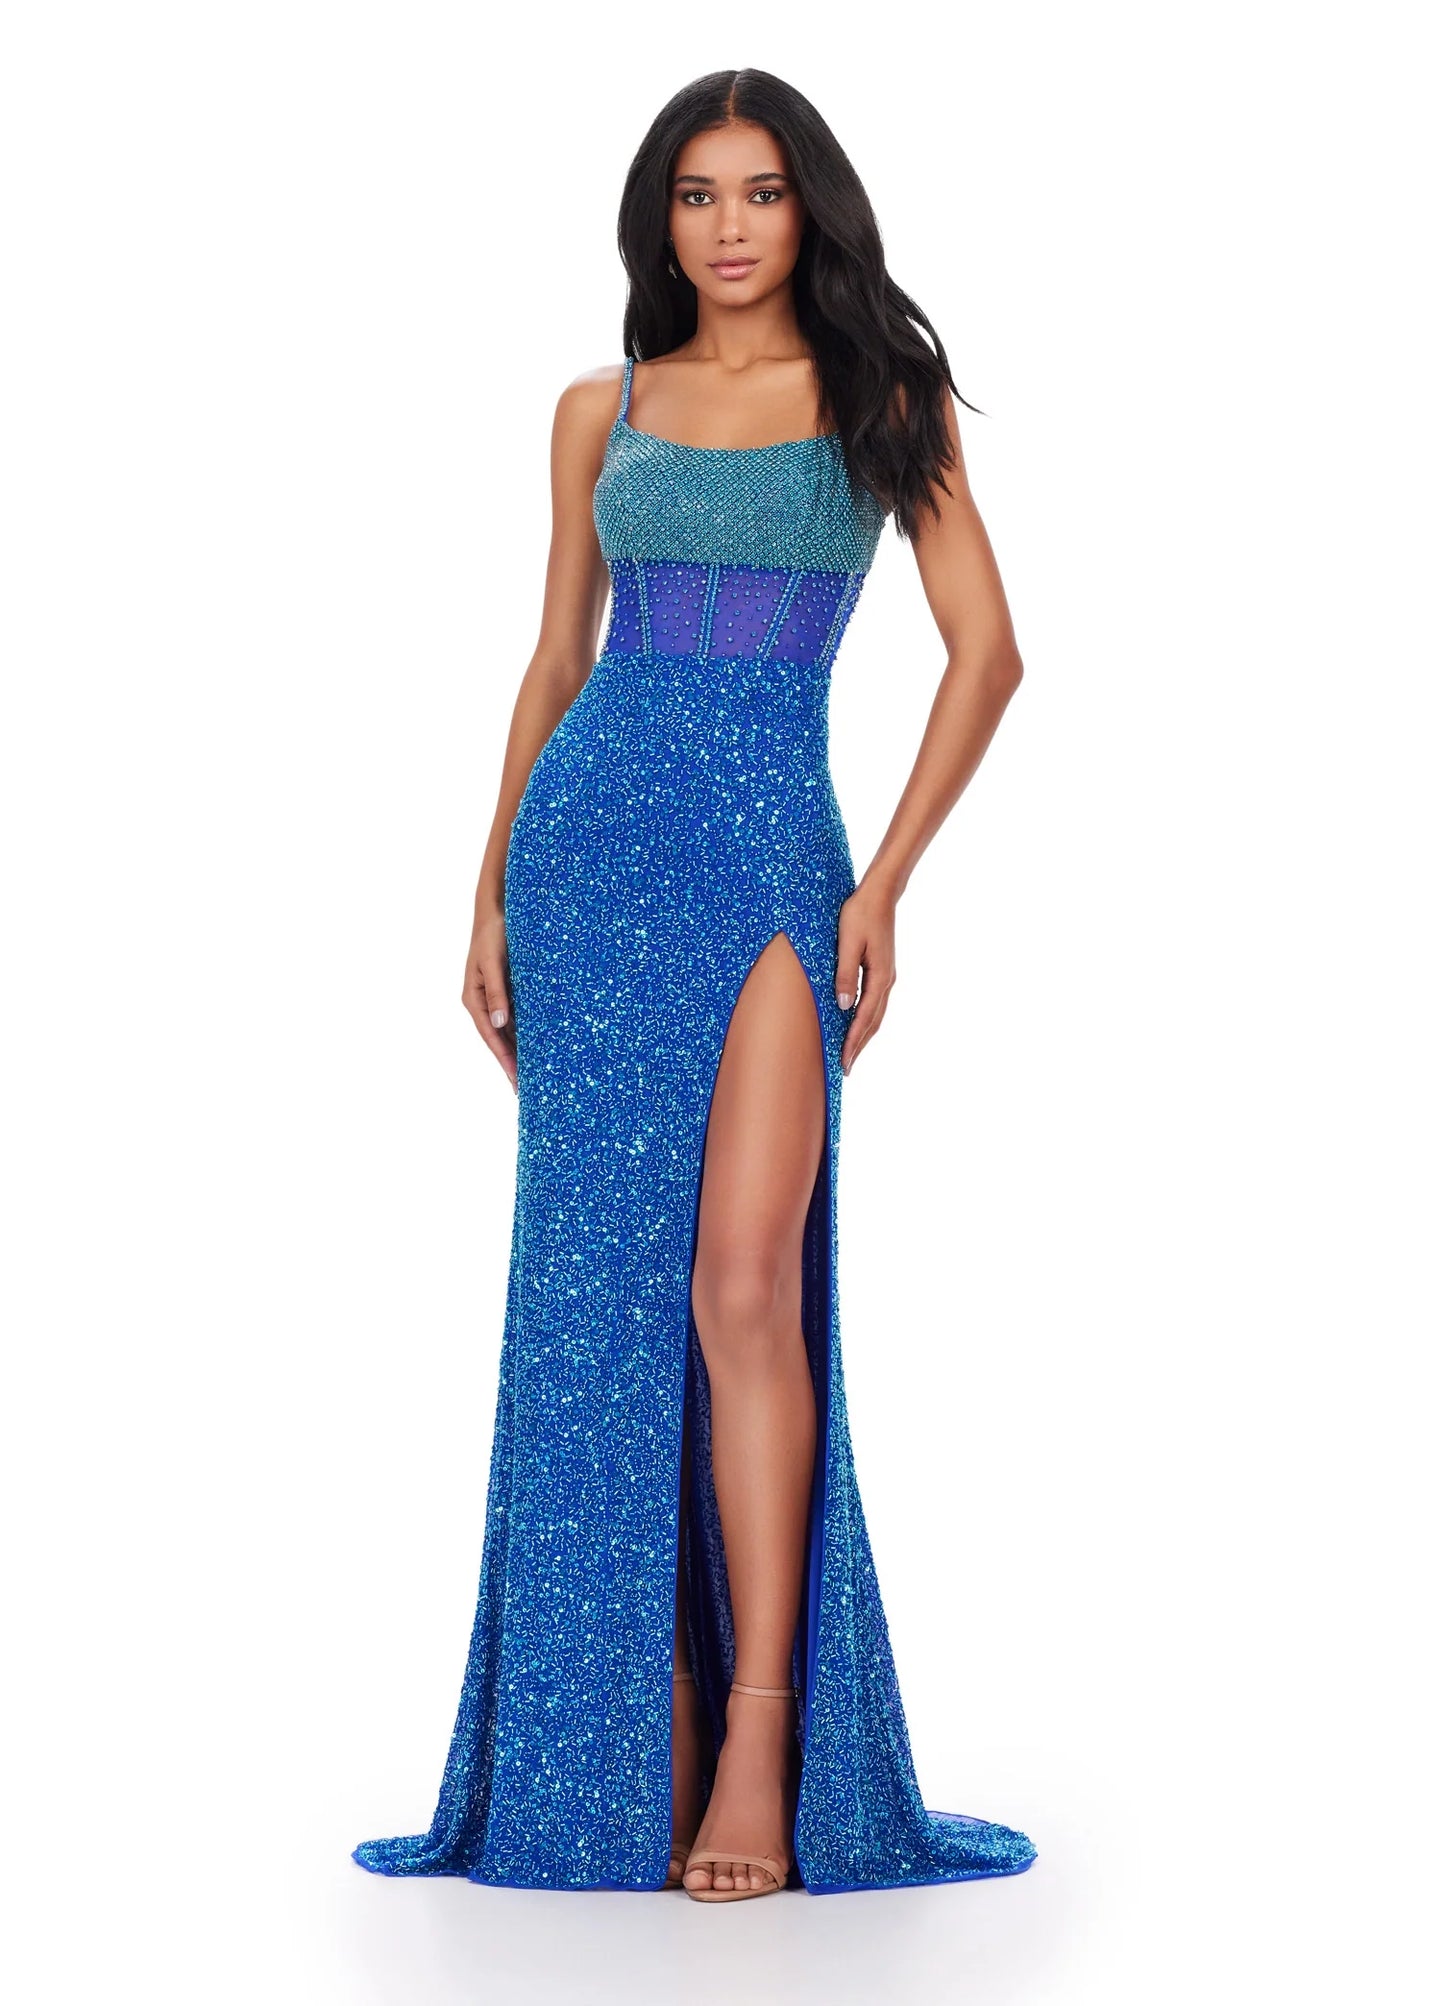 The Ashley Lauren 11448 is a stunning long gown for special occasions. It features a sequin-studded bodice with corset closure, side slit, and a backless design for a flattering silhouette. Perfect for proms, pageants, and formal events. All eyes will be on you in this fully beaded gown. The corset style bustier is embellished with crystals that are sure to dazzle. The left leg slit and lace up back complete the look. 